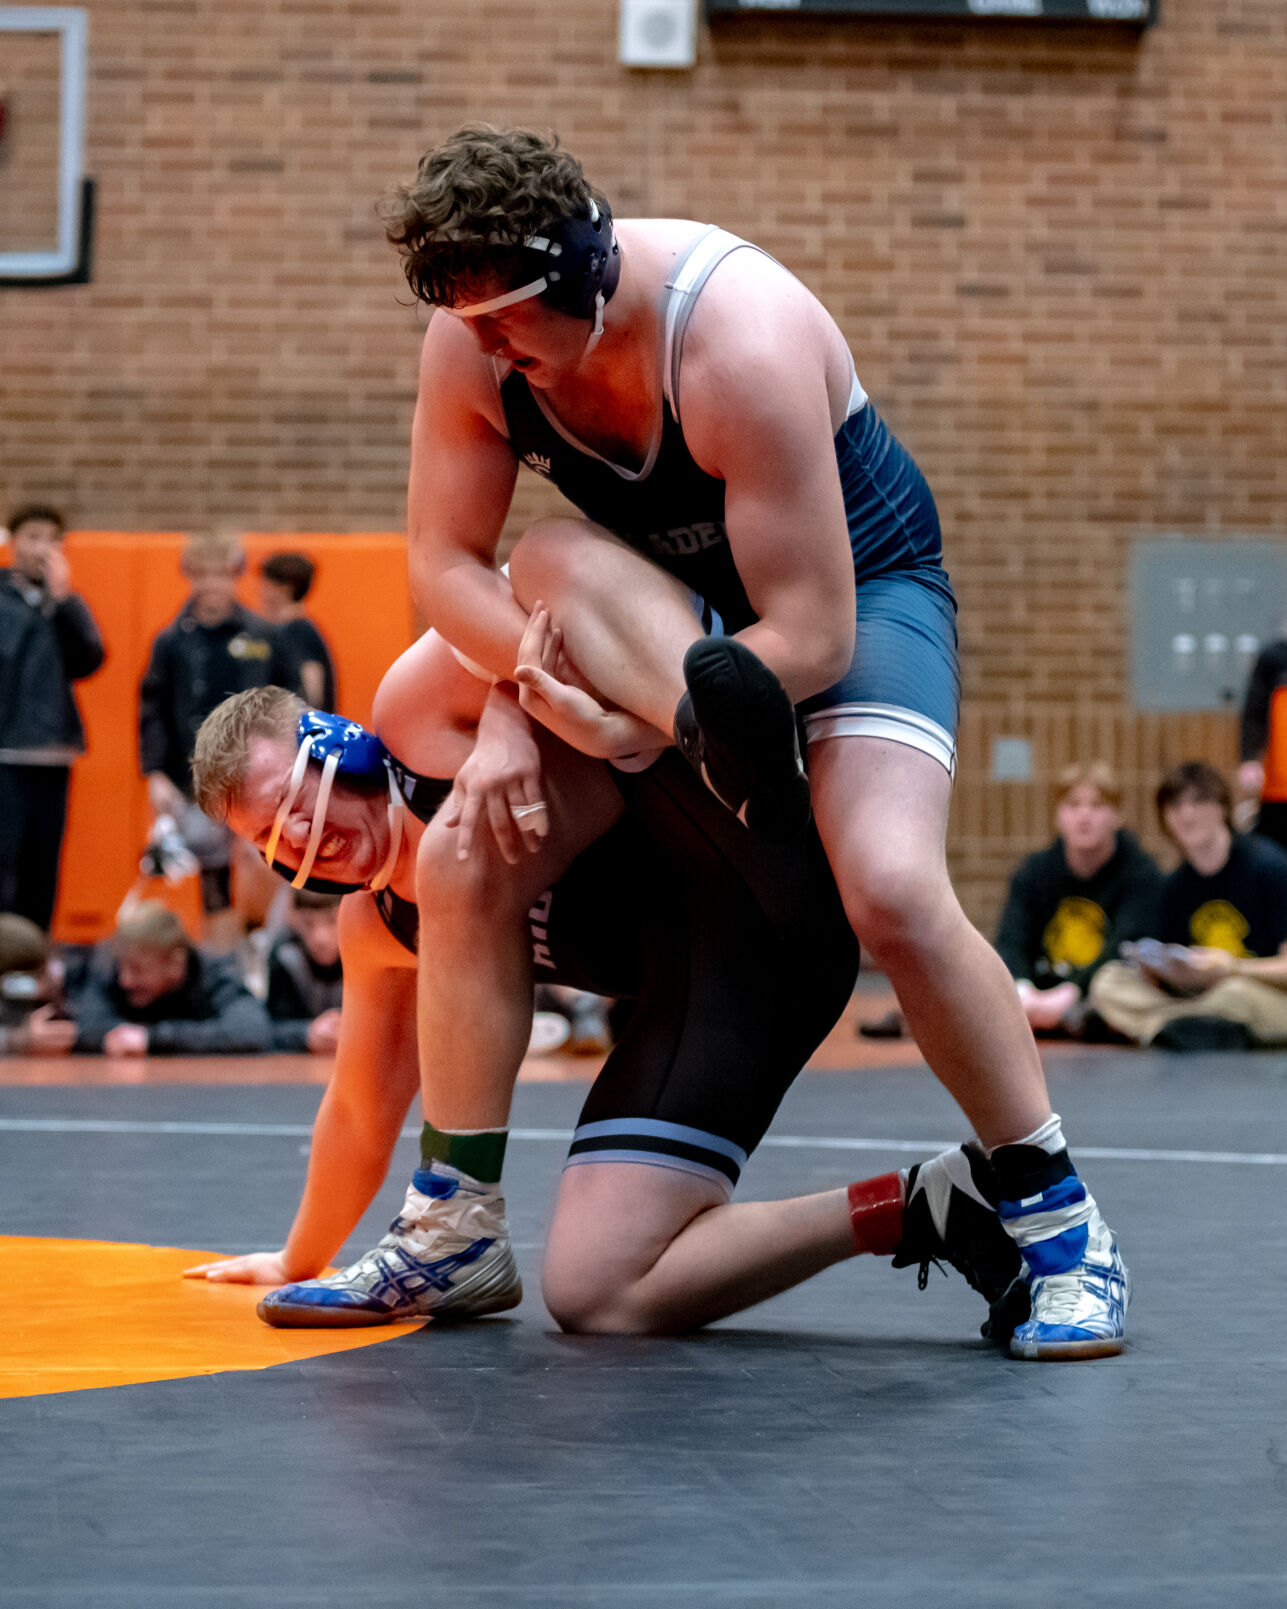 Local Wrestling Teams Dominate Day One of Regional Tournament, Eyeing State Championship